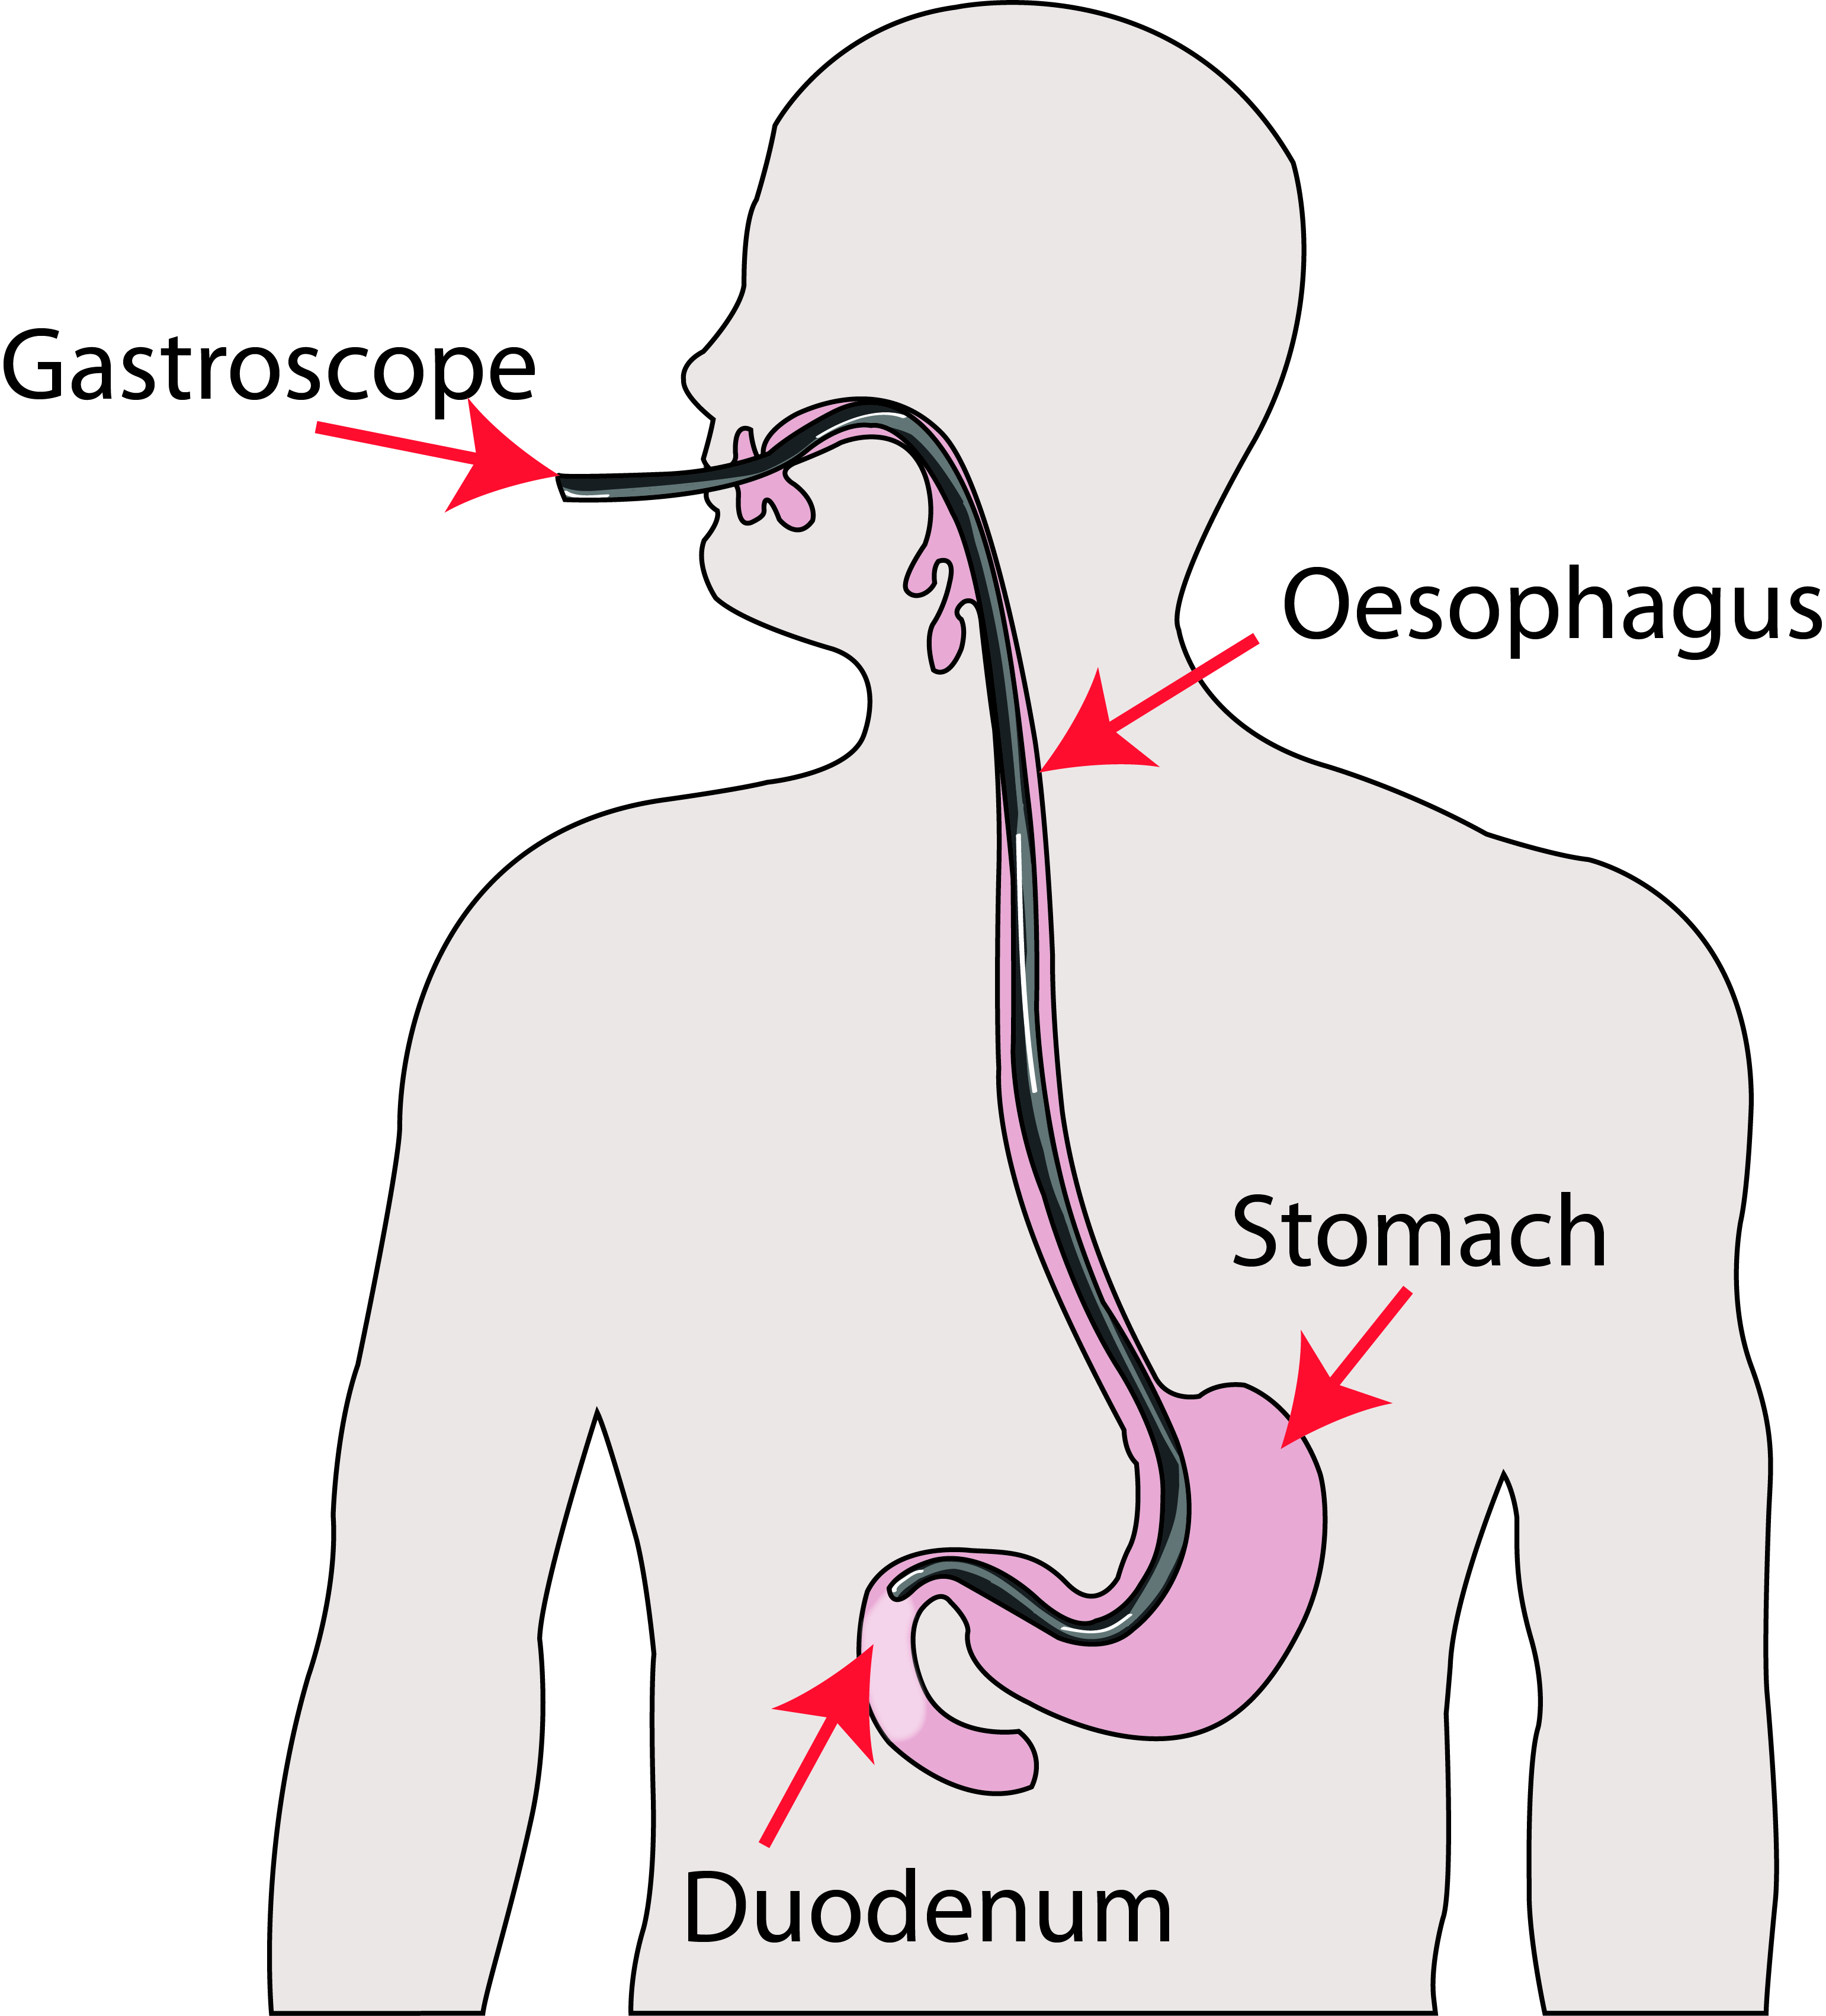 Gastroscope being passed through the patient's mouth, through their oesophagus and into their stomach